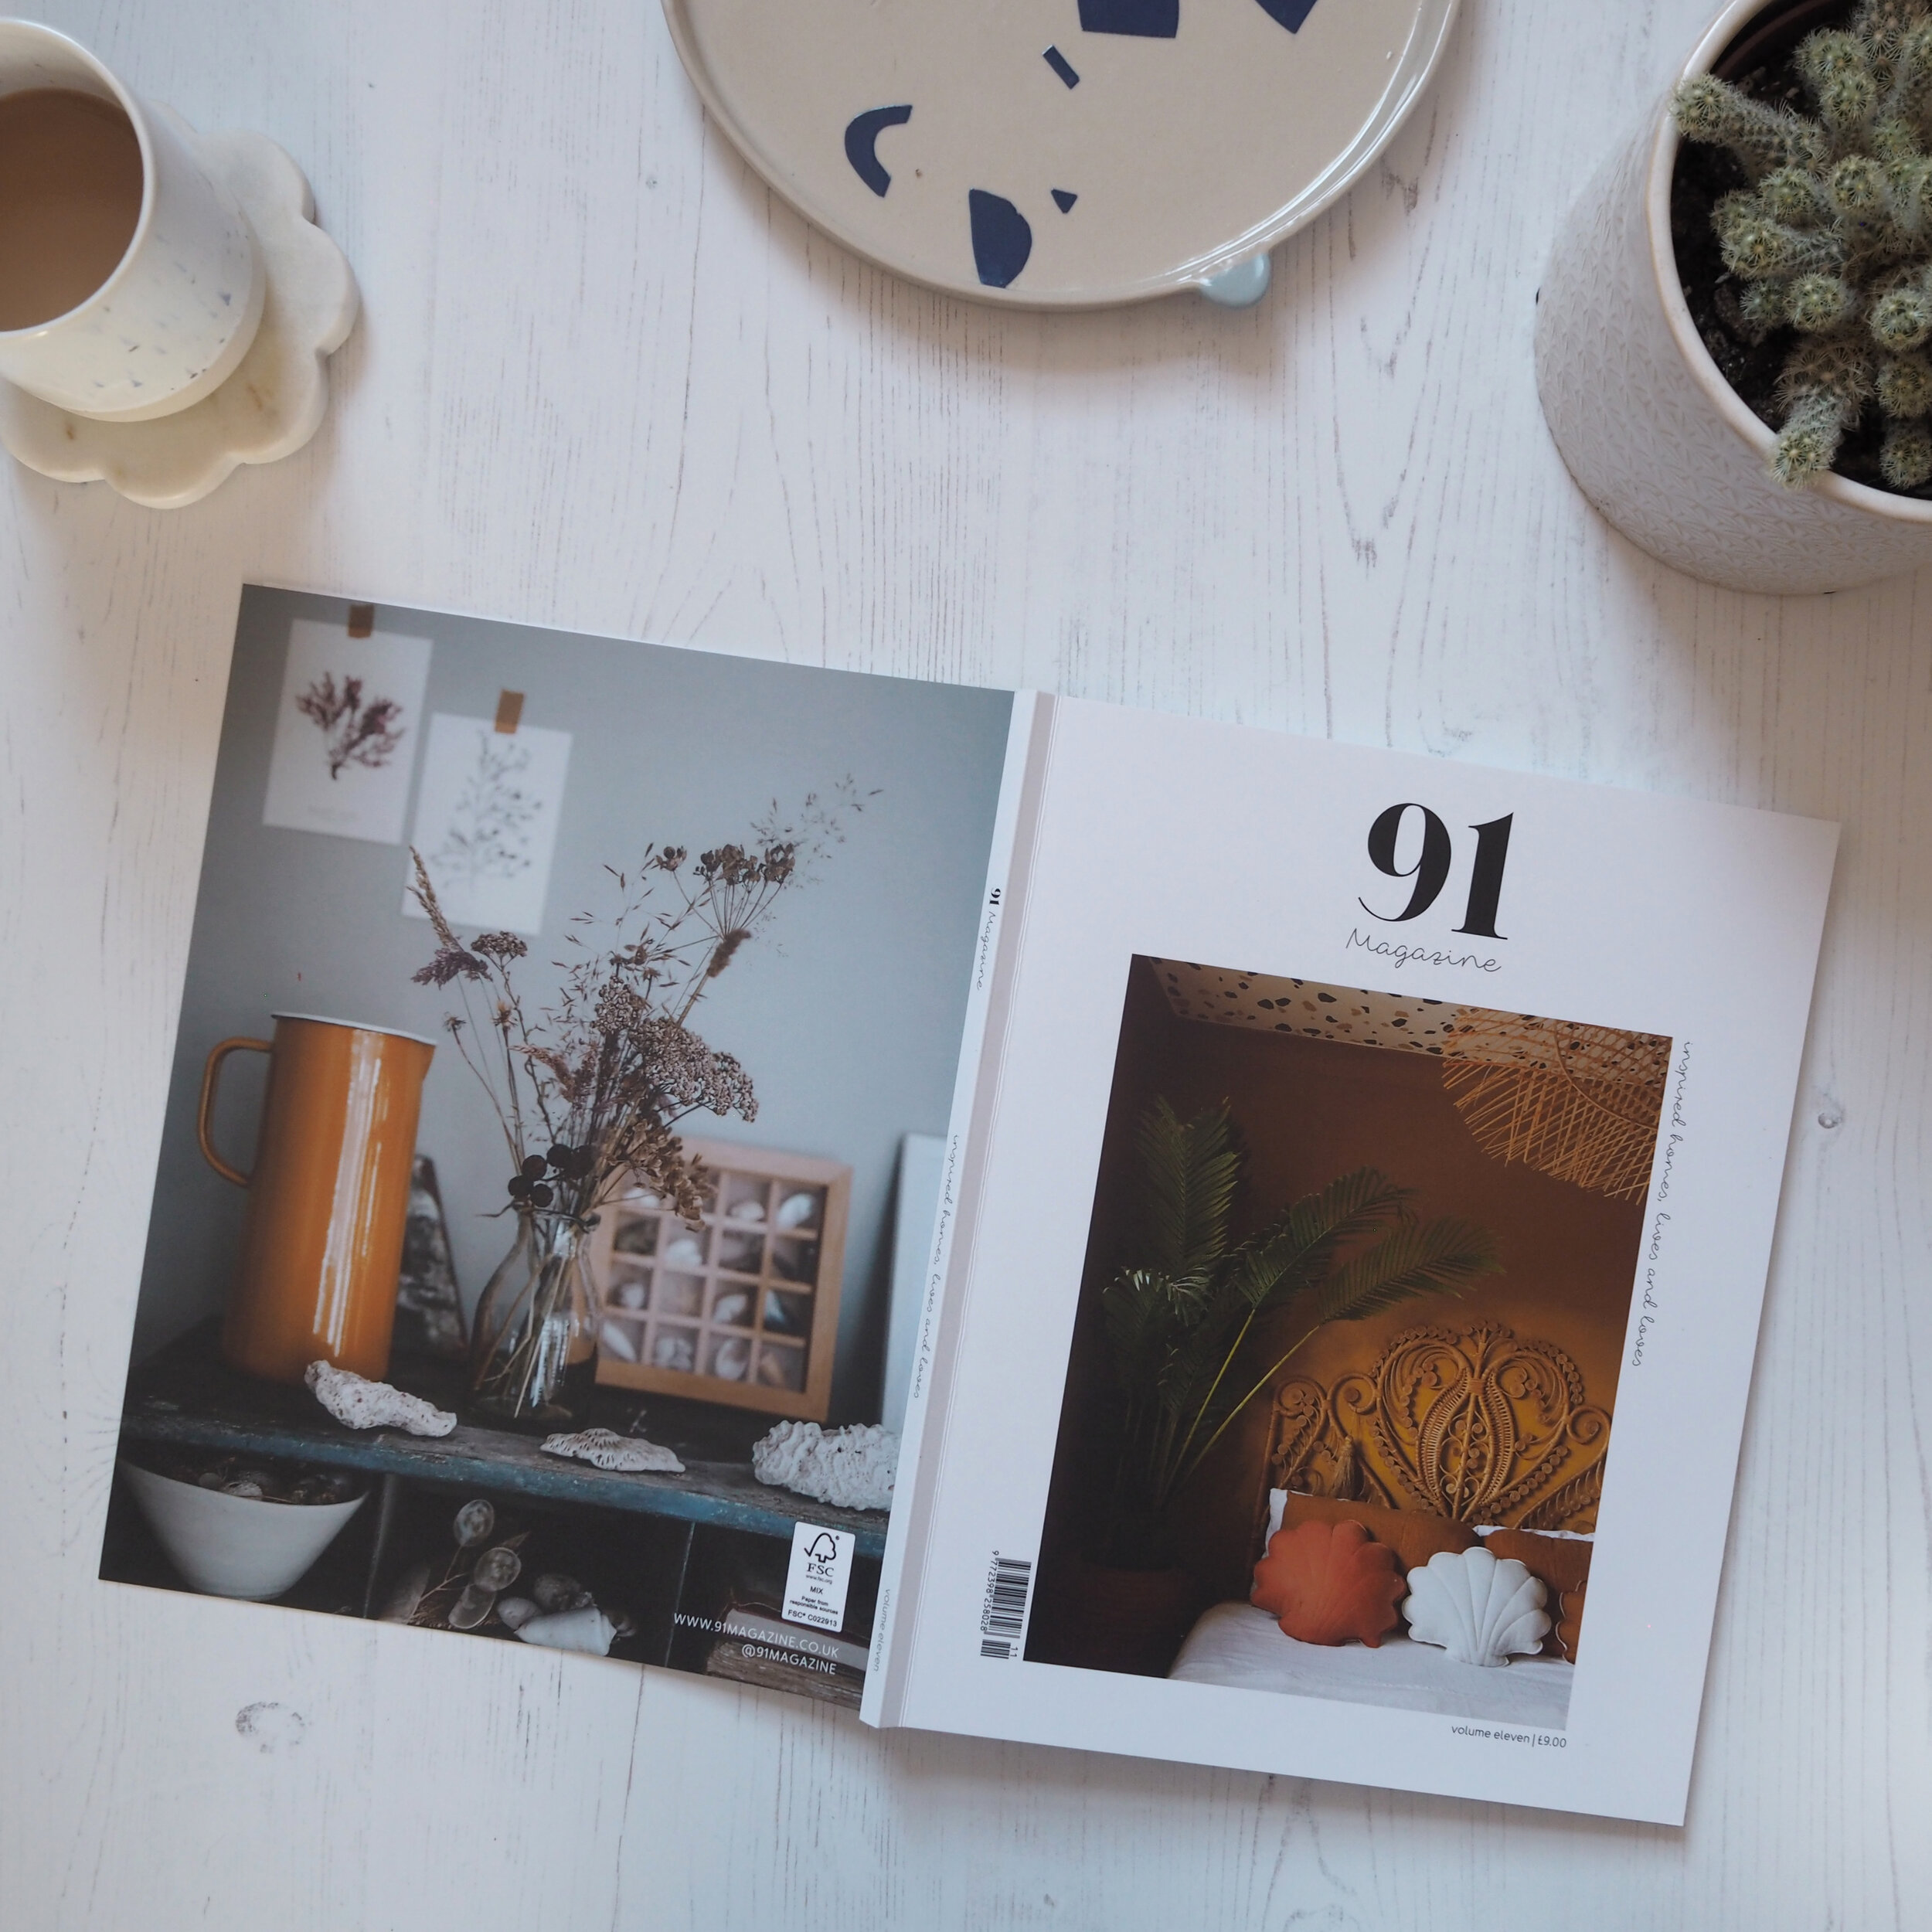 91 Magazine - an independent interiors magazine, focussed on creative interiors and supporting small business